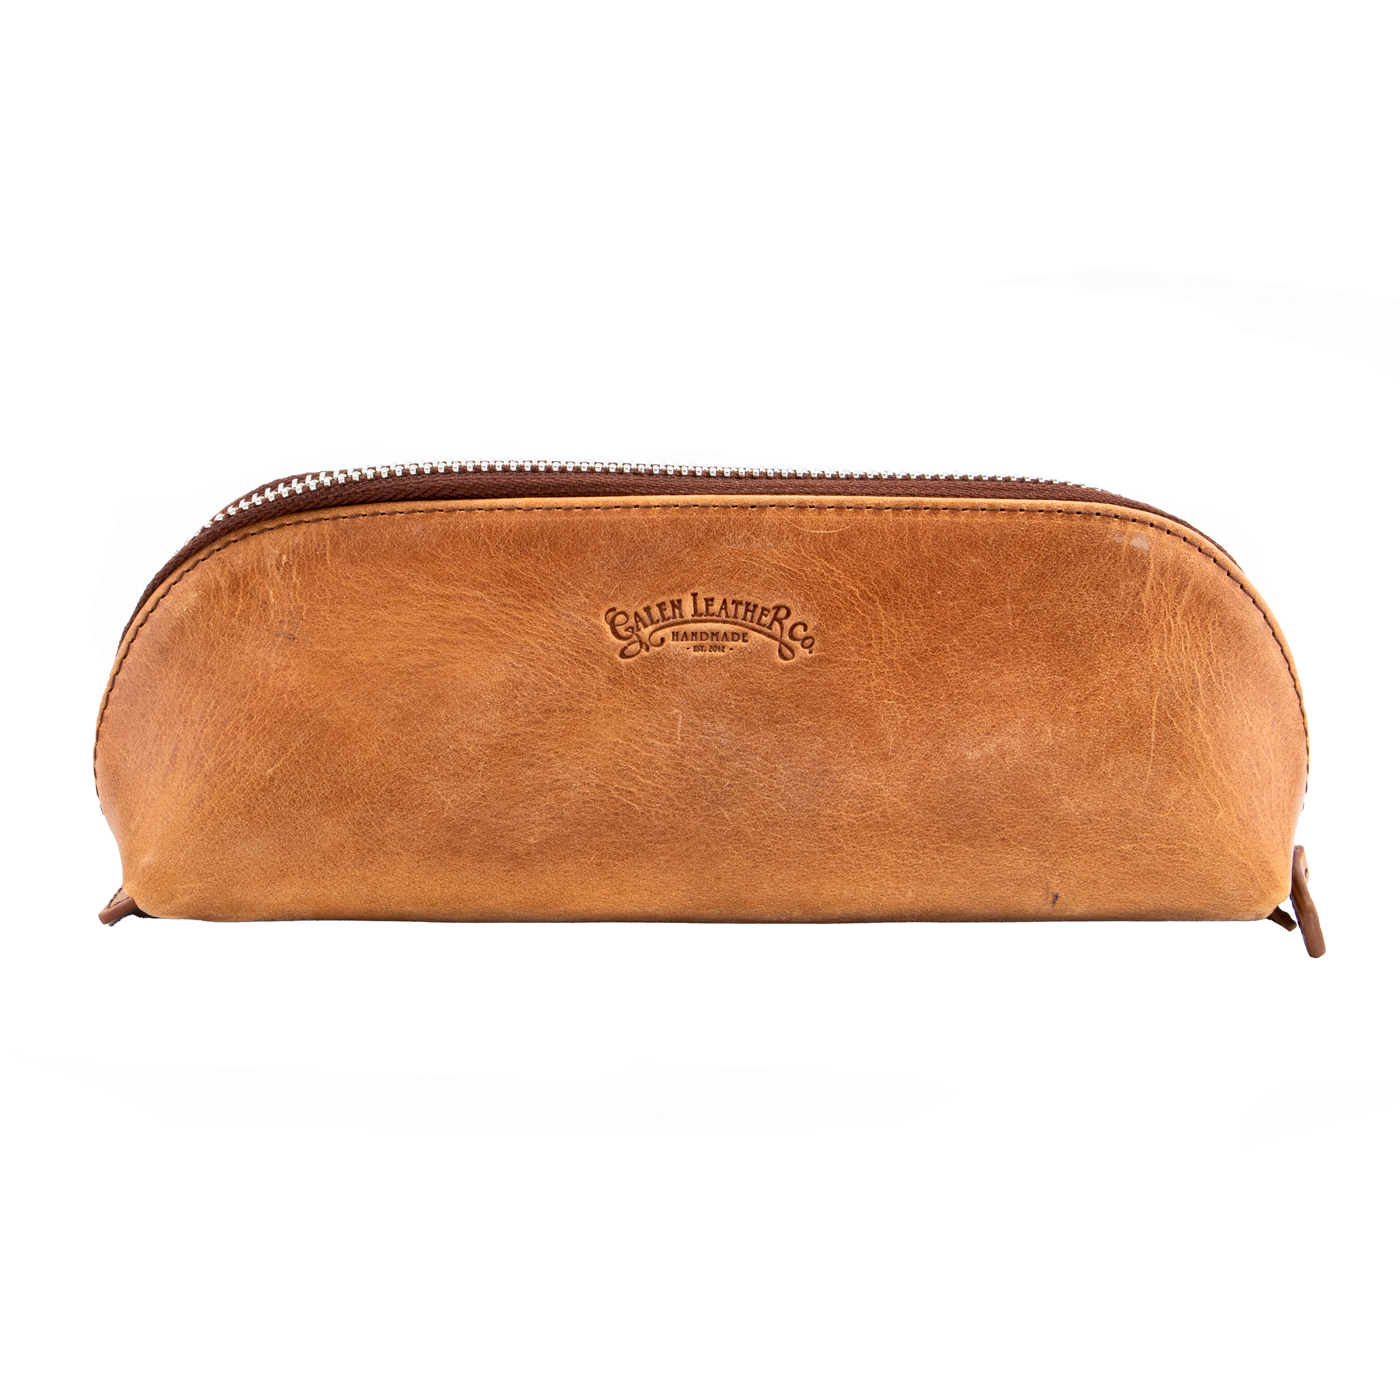 Galen Leather Co. Leather Zippered XL Pencil Cases- Crazy Horse Tan